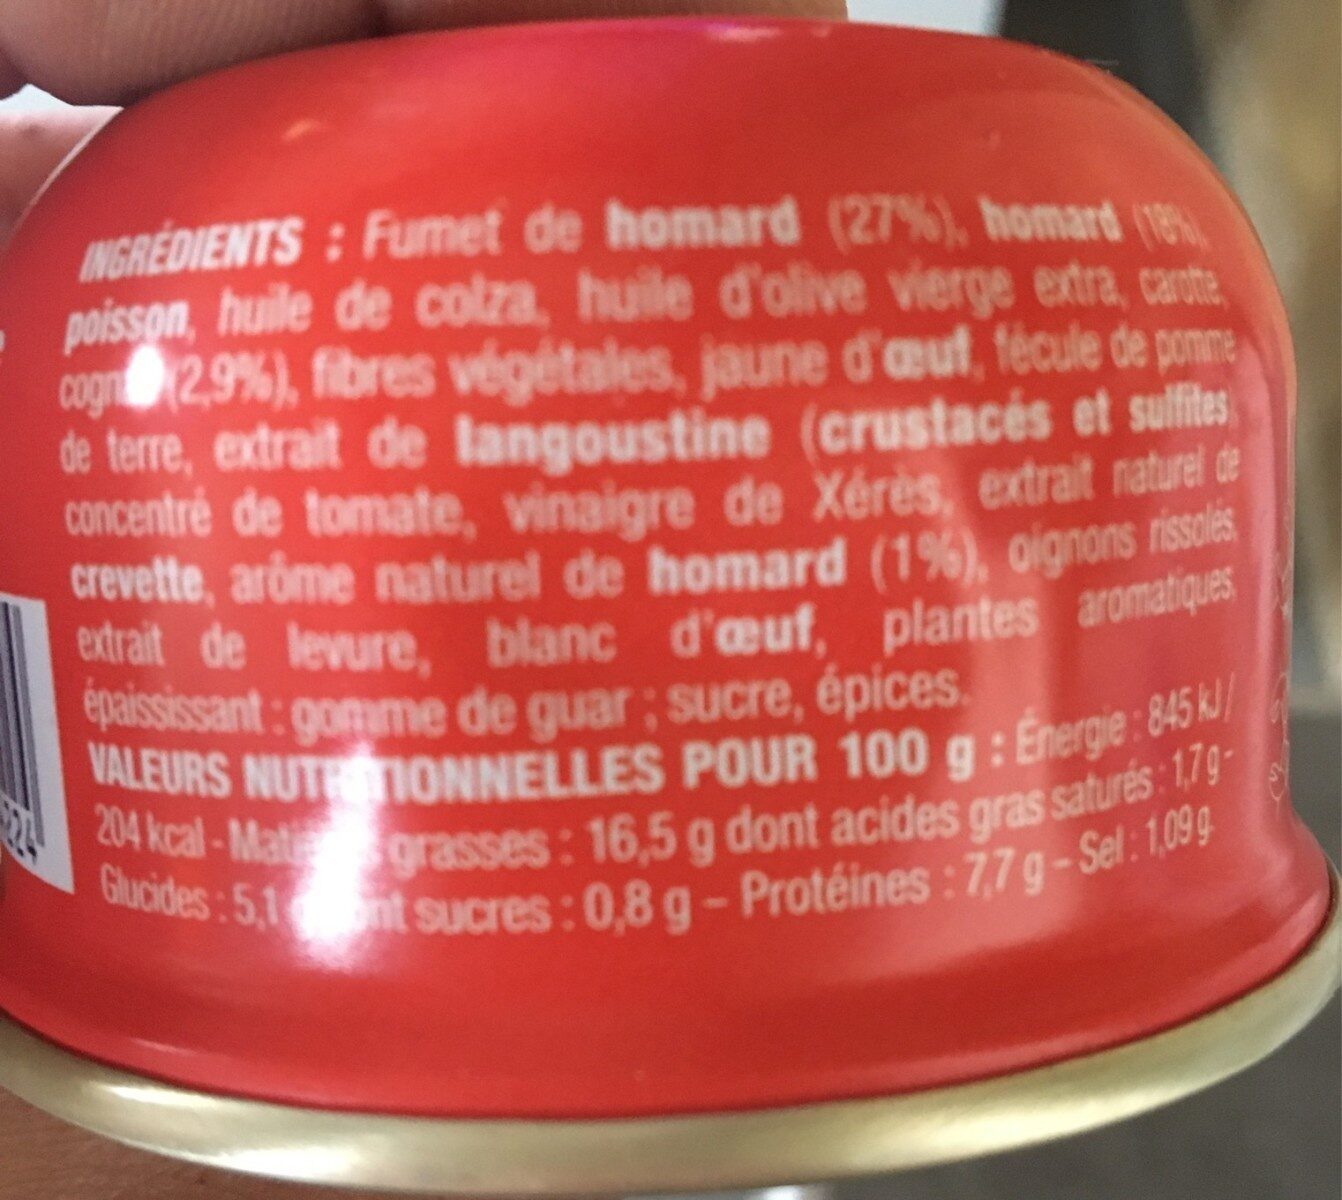 Nos Toasts Chauds Homard - Nutrition facts - fr